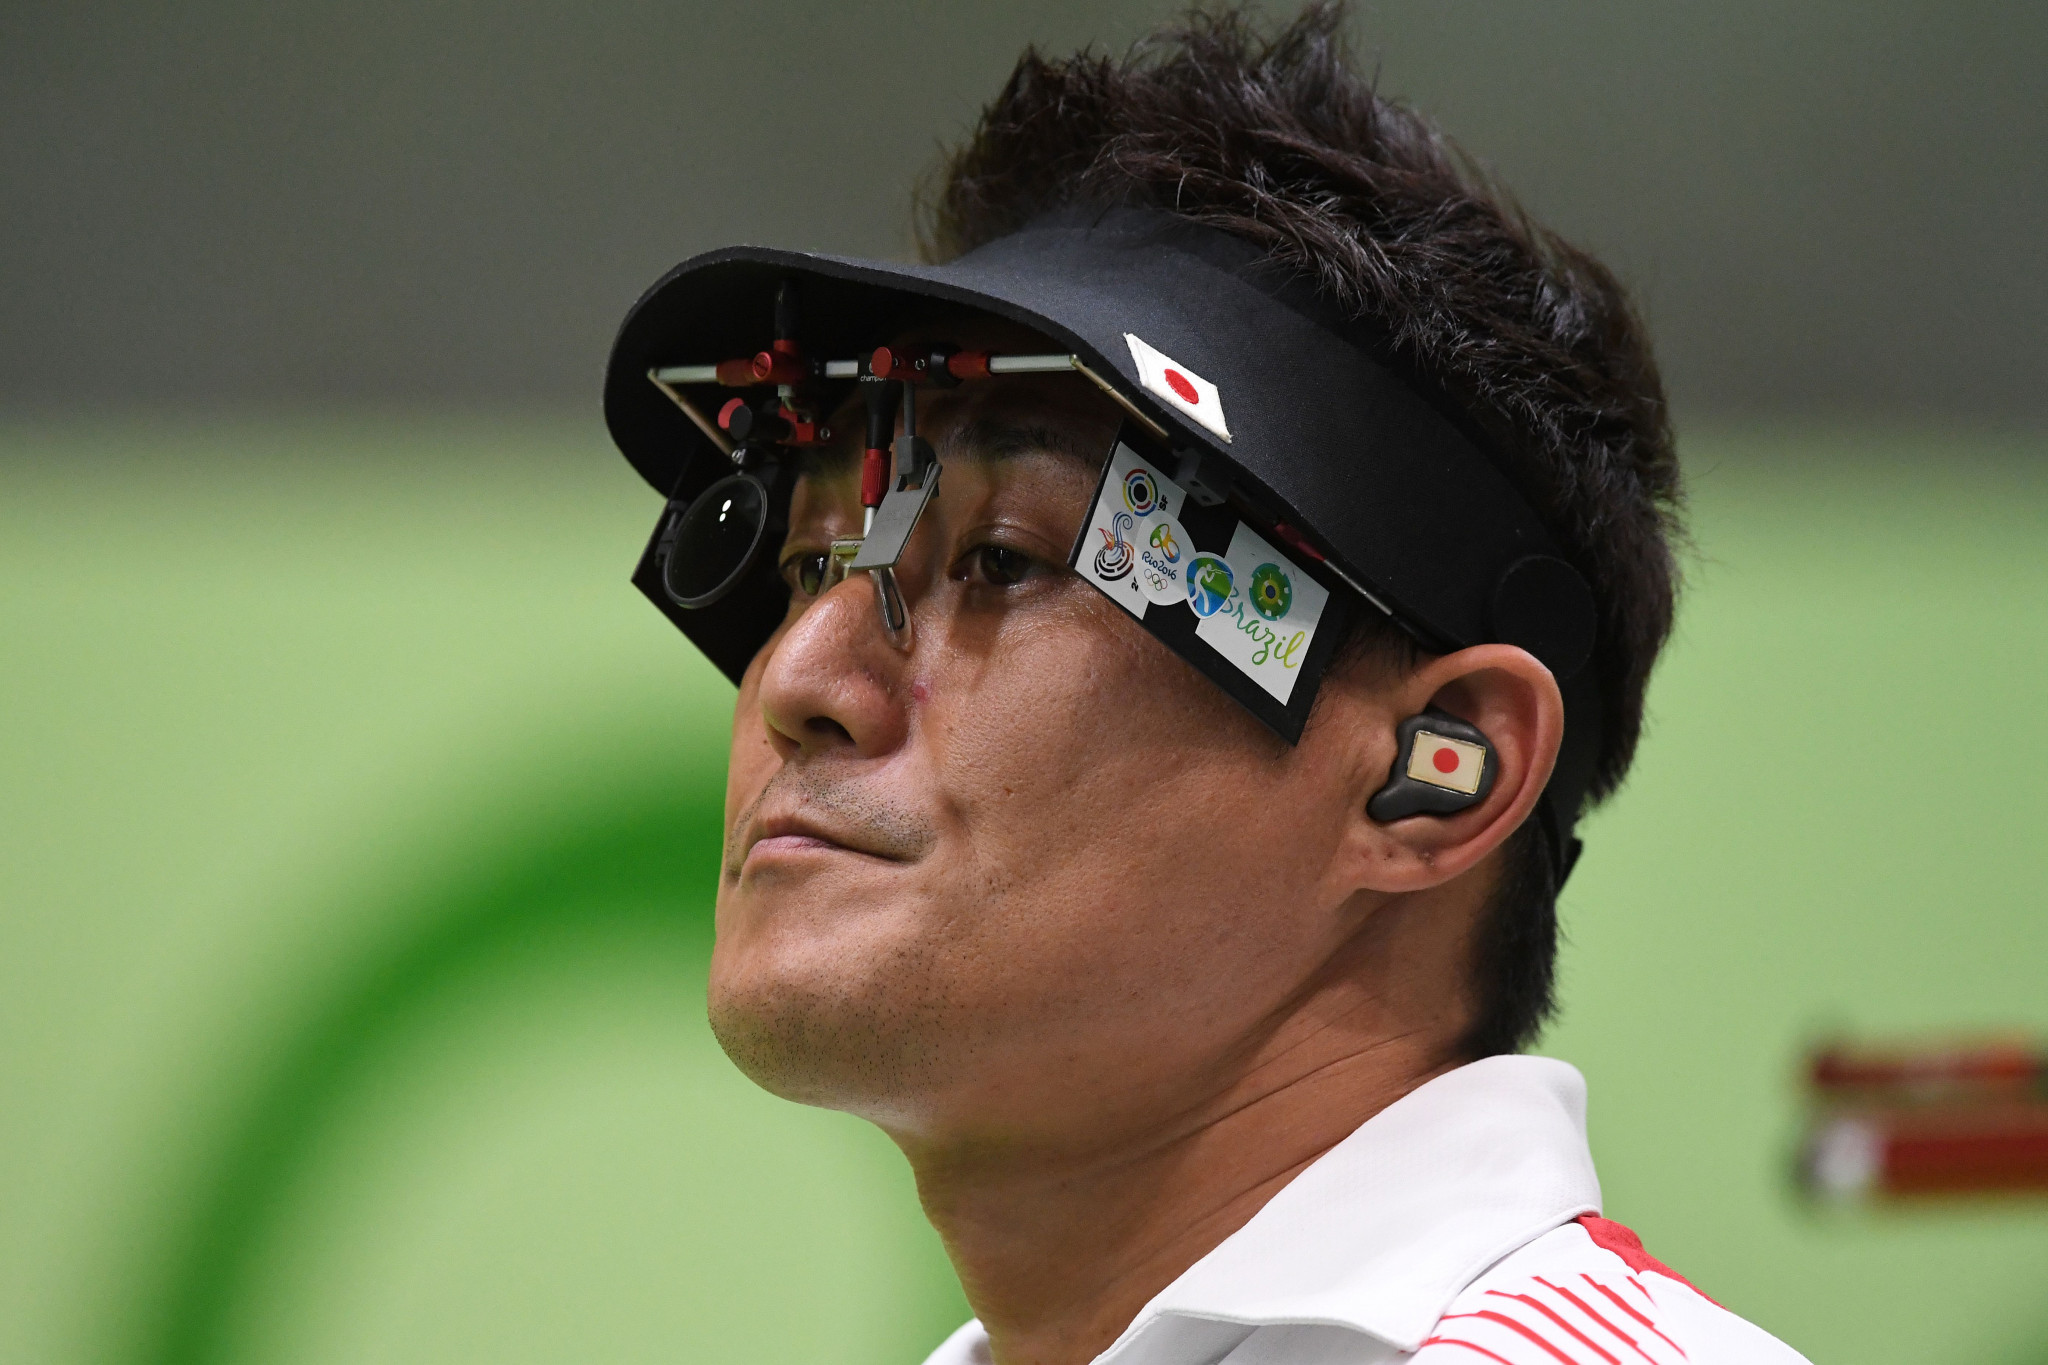 Tomoyuki and Rhode named ISSF shooters of the year